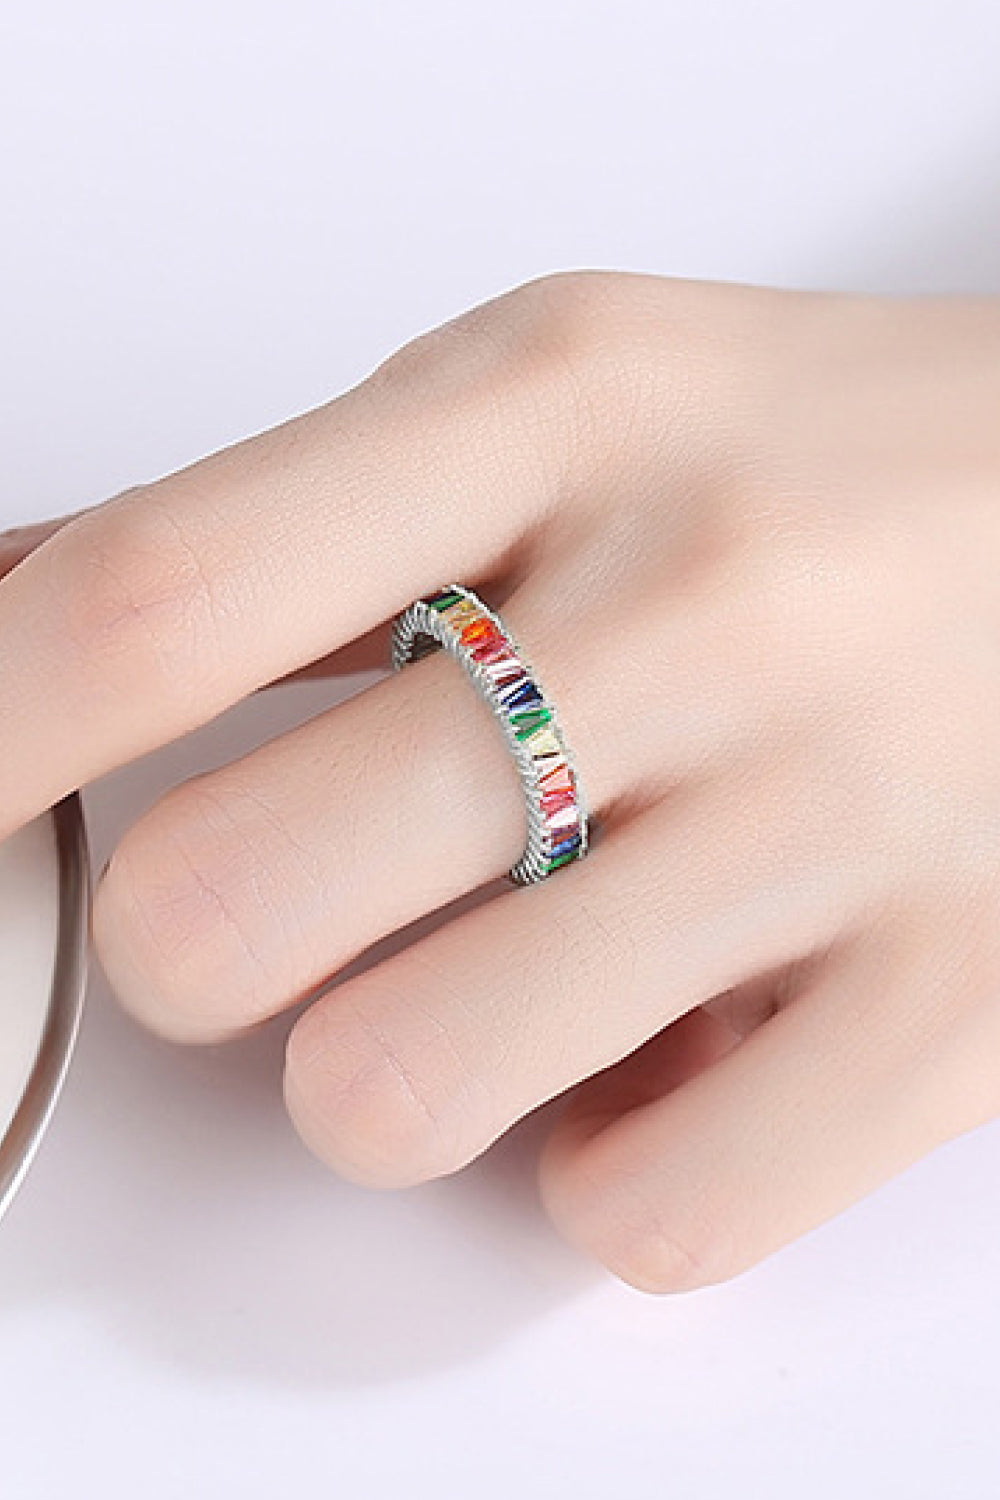 Women’s Multicolored Cubic Zirconia 925 Sterling Silver Ring